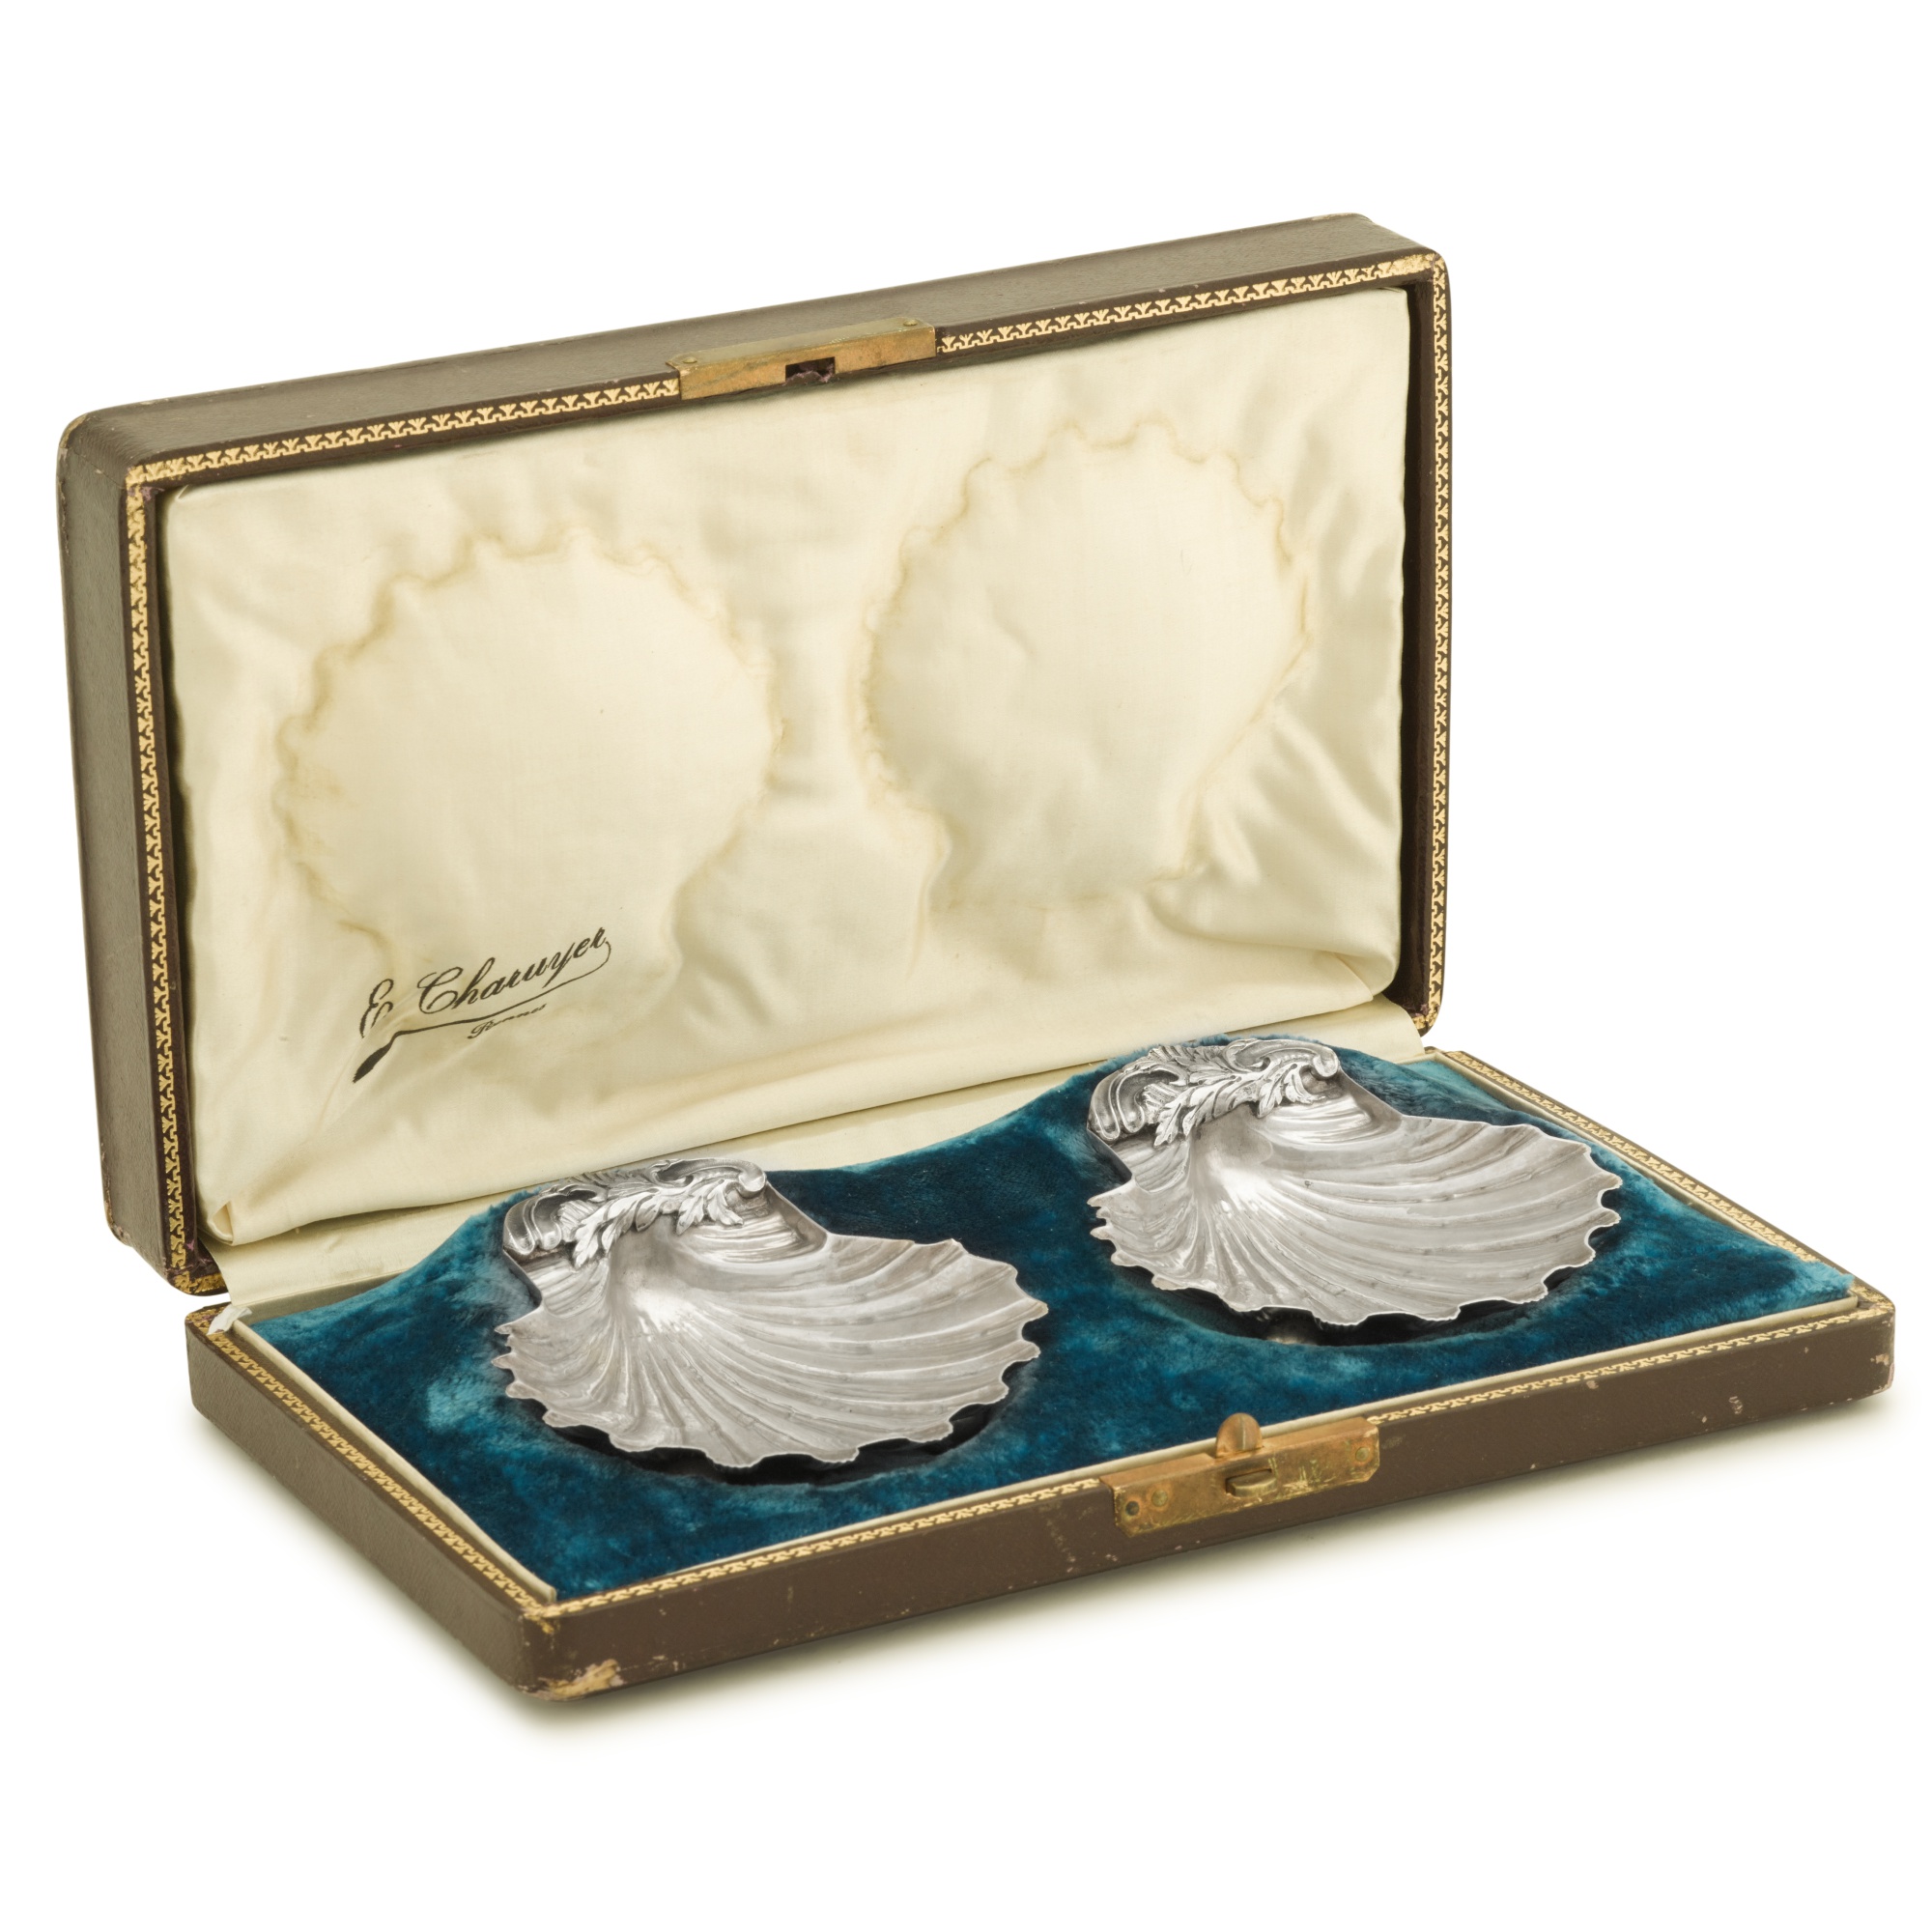 A cased pair of French silver shell dishes, Martial Gauthier, Paris, circa 1900 - Image 3 of 3